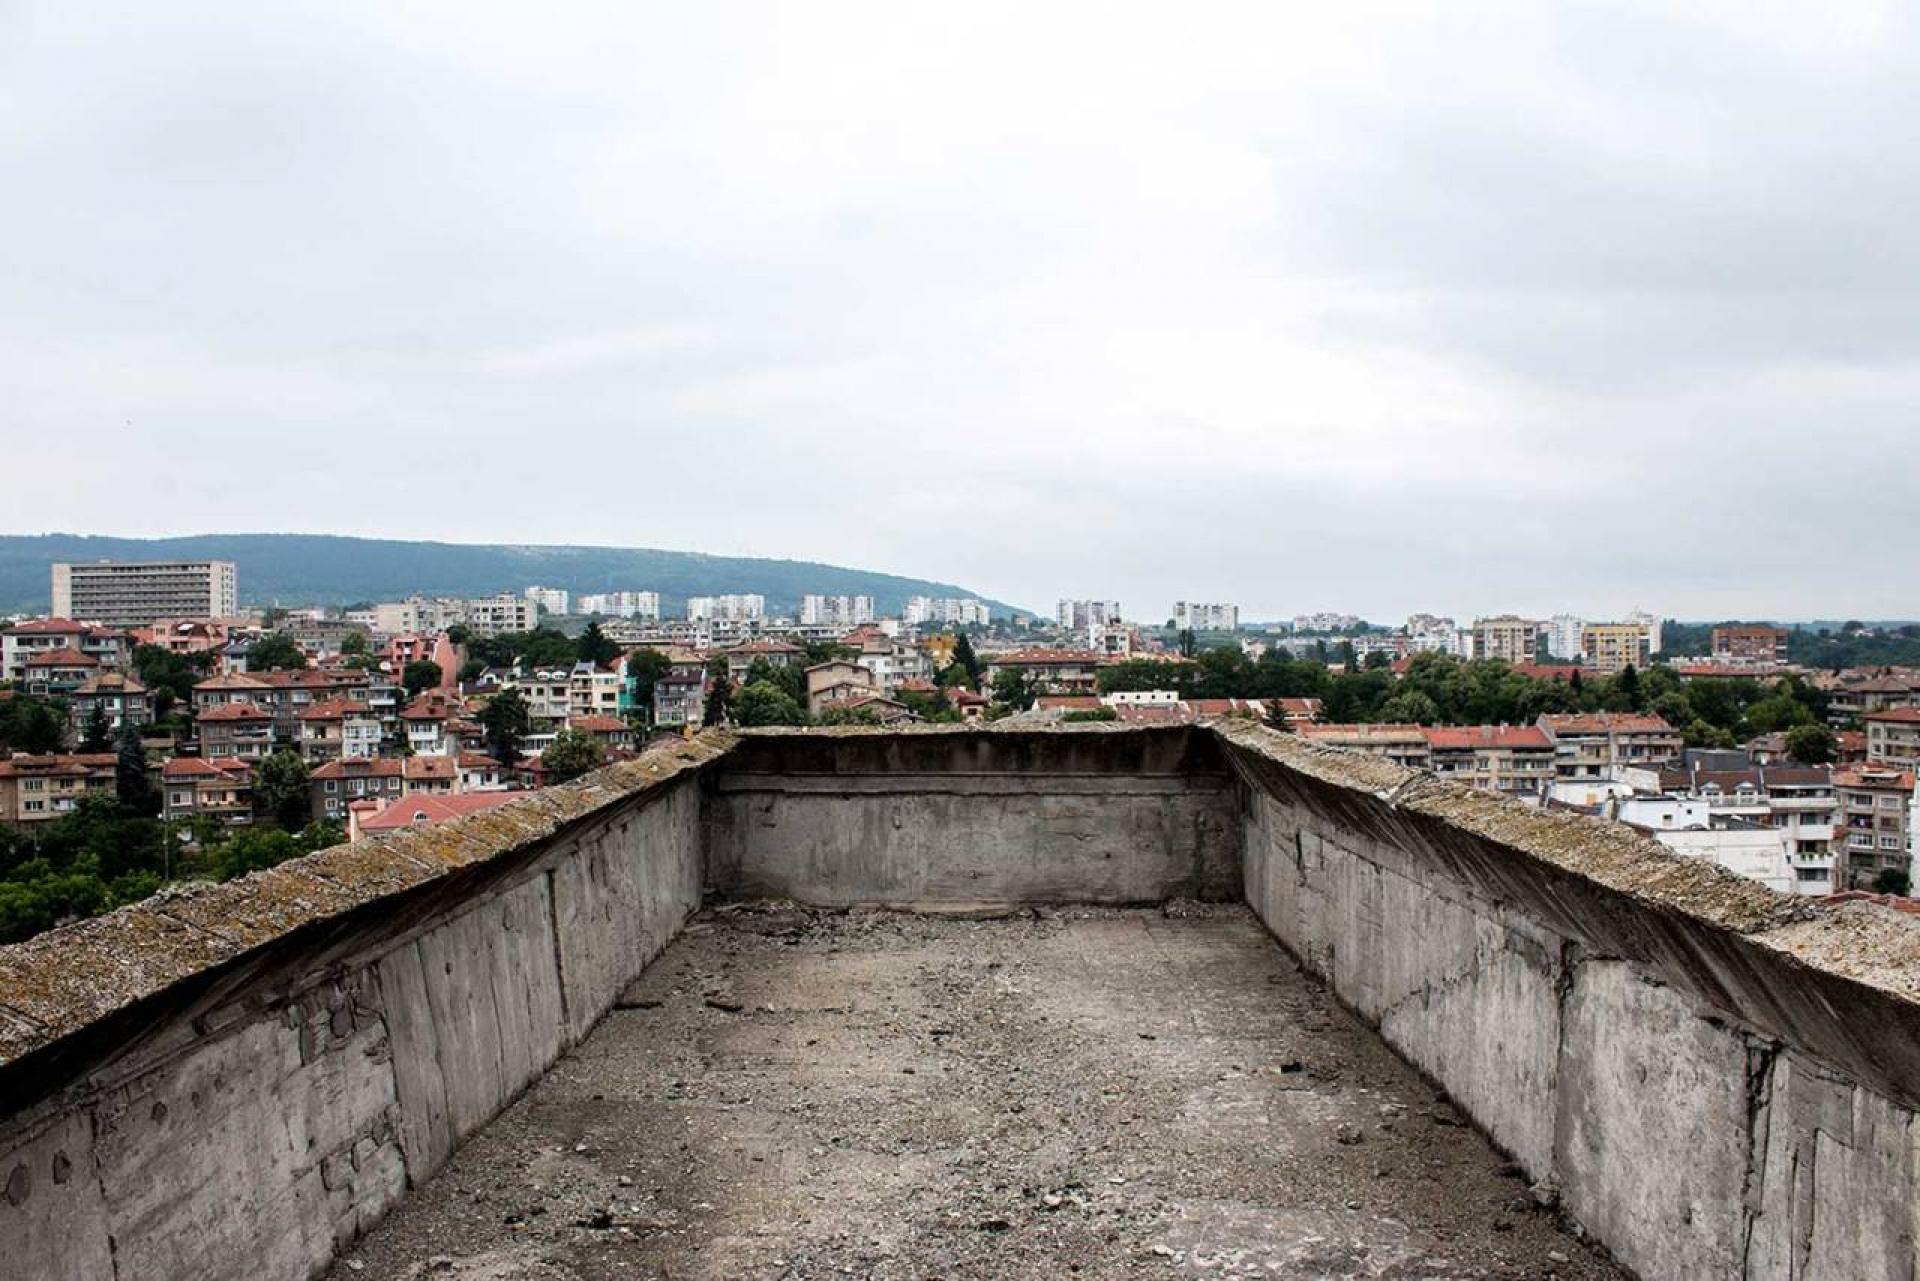 Shumen from the rooftops. | Photo © Darmon Richter